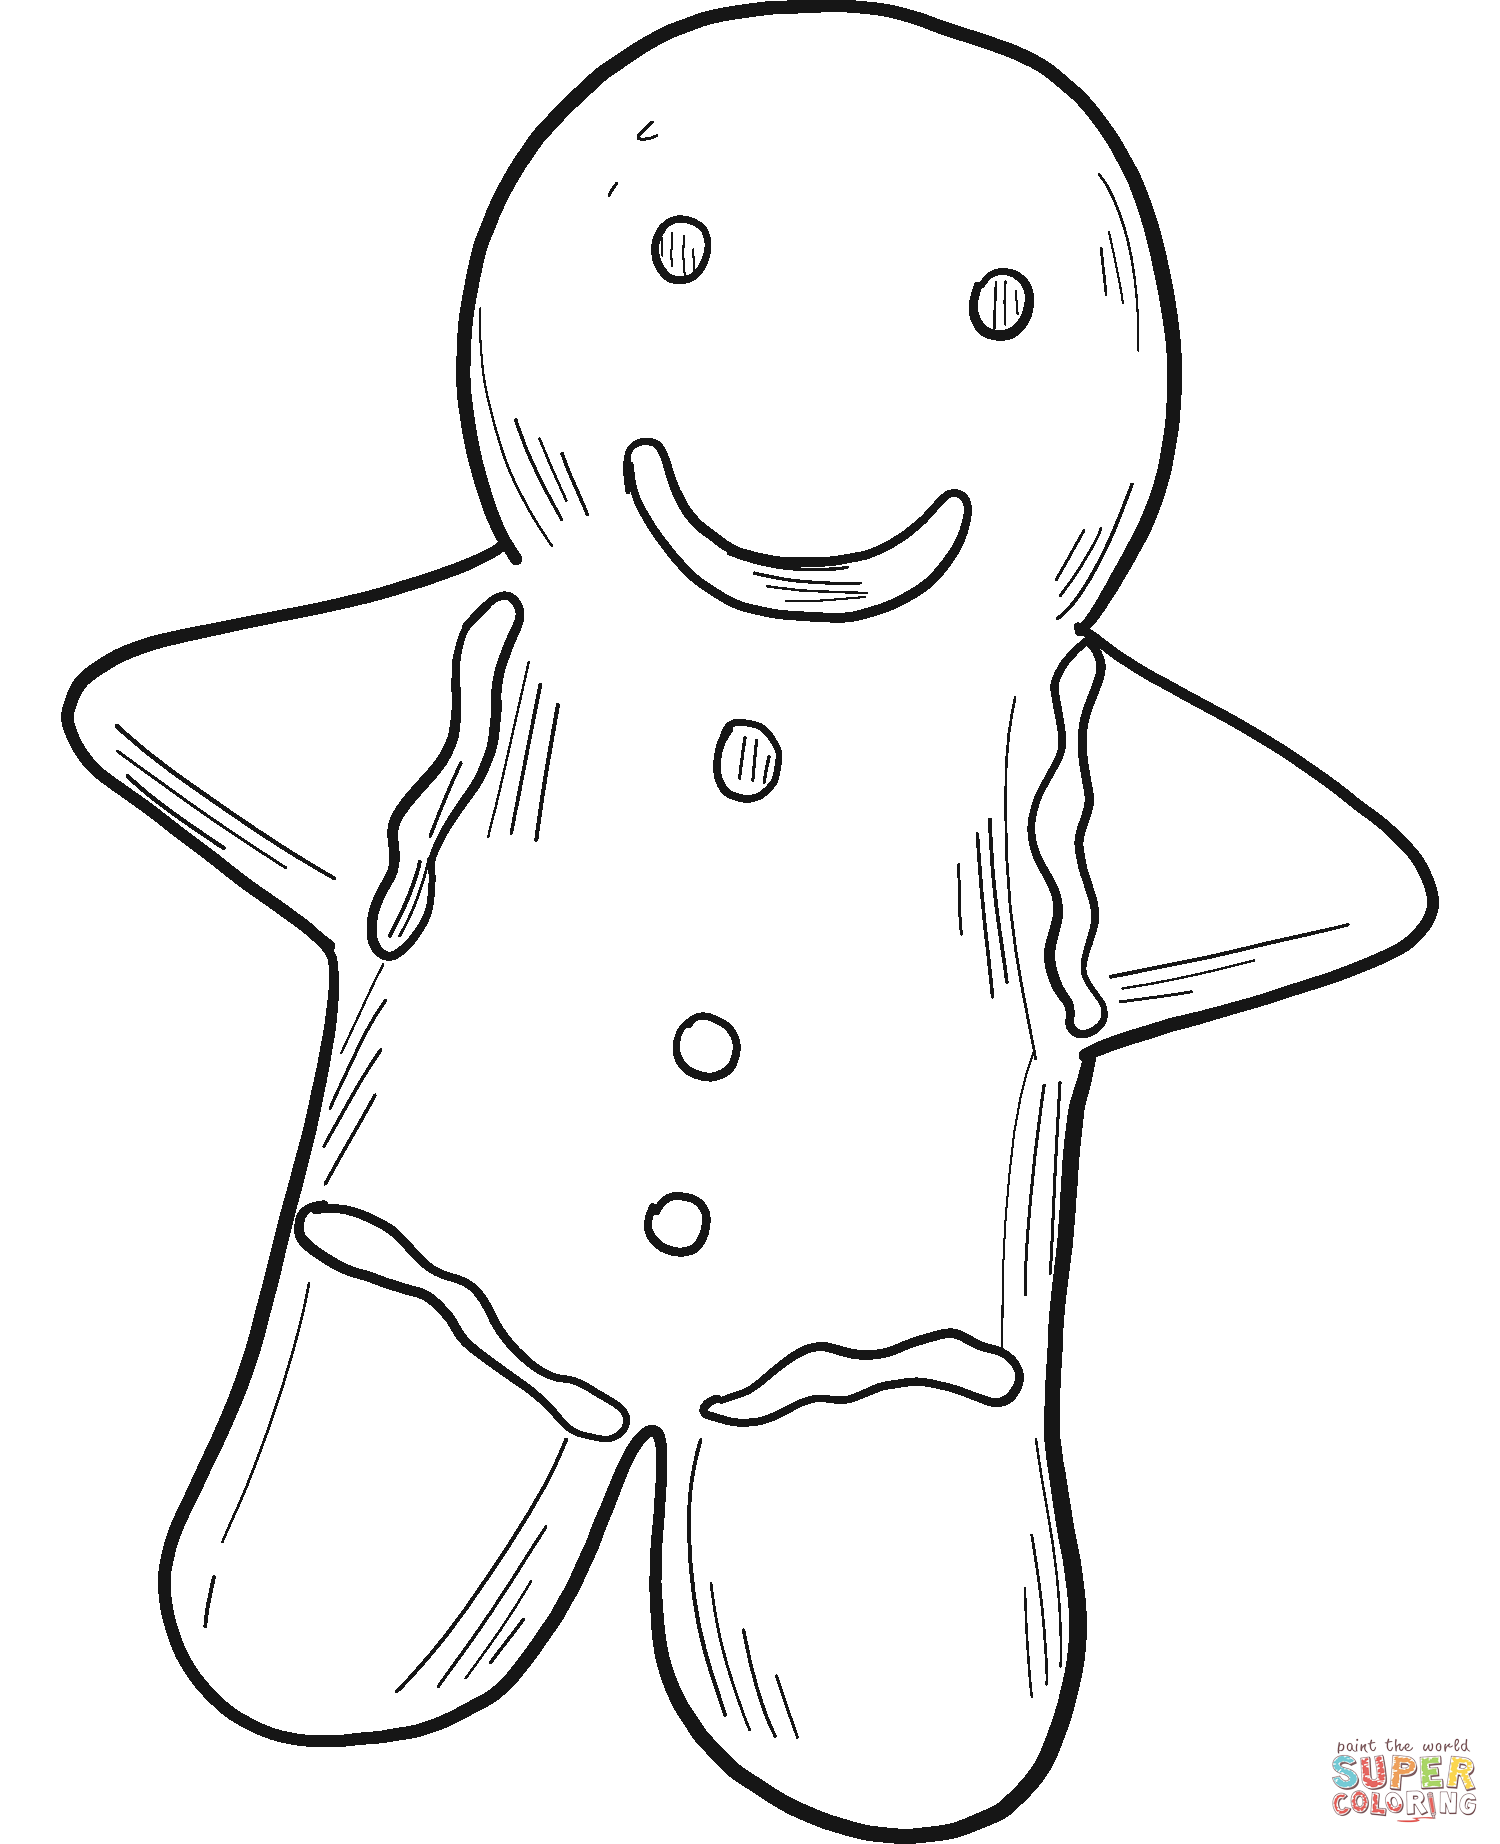 Gingerbread man coloring page free printable coloring pages